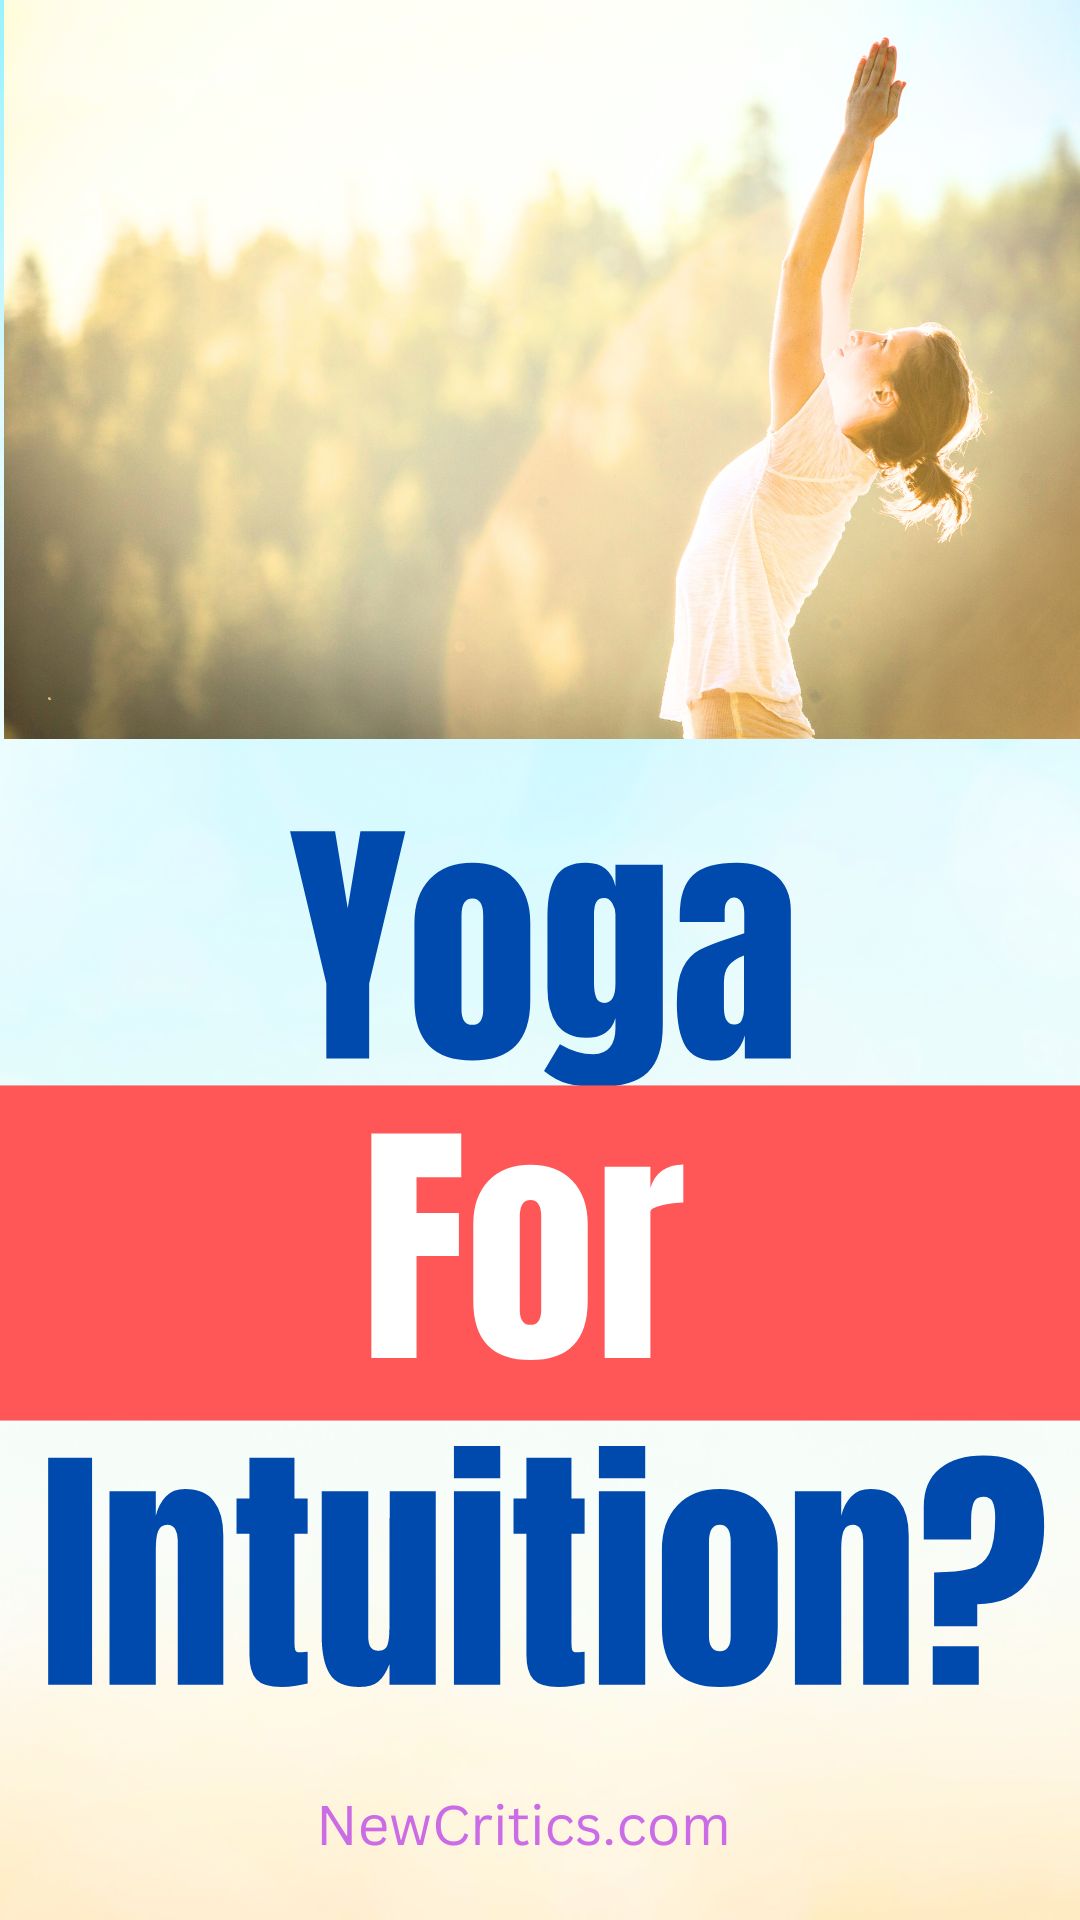 Yoga For Intuition / Canva